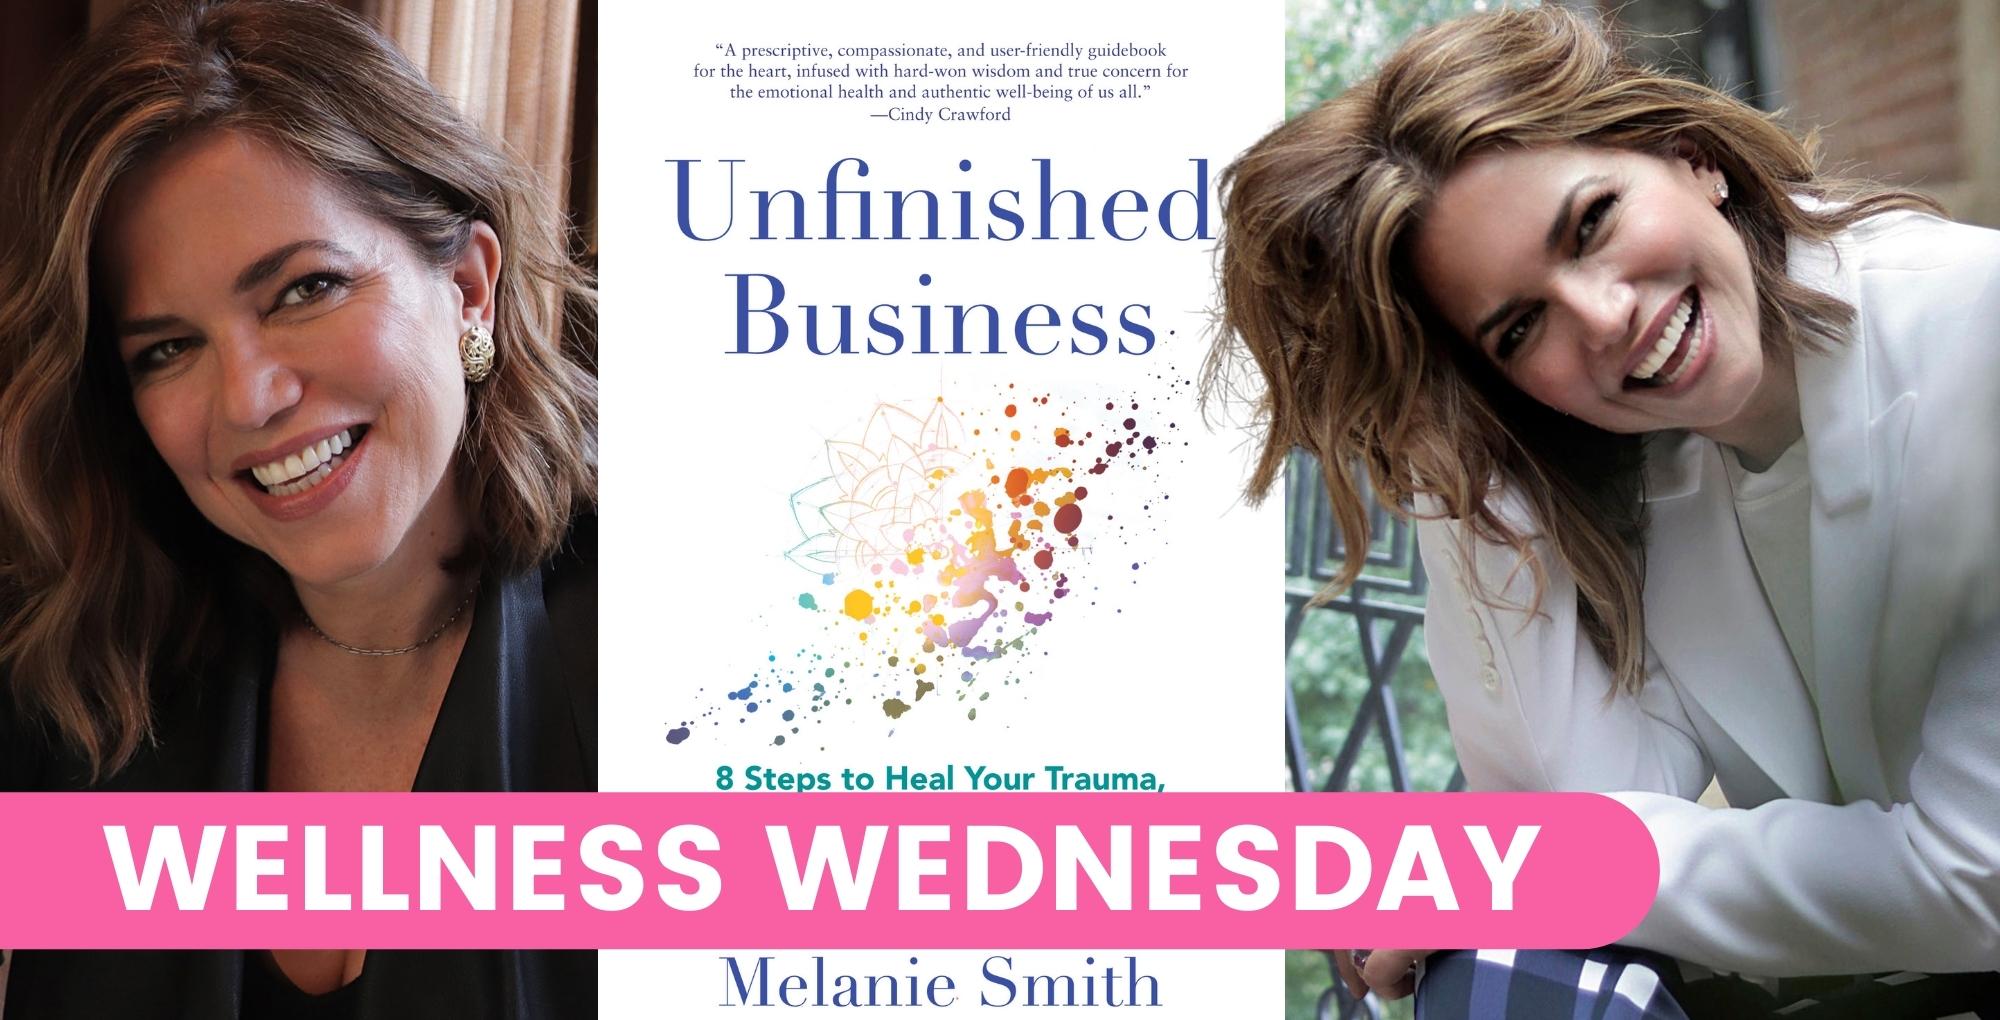 as the world turn star melanie smith and her book unfinished business.